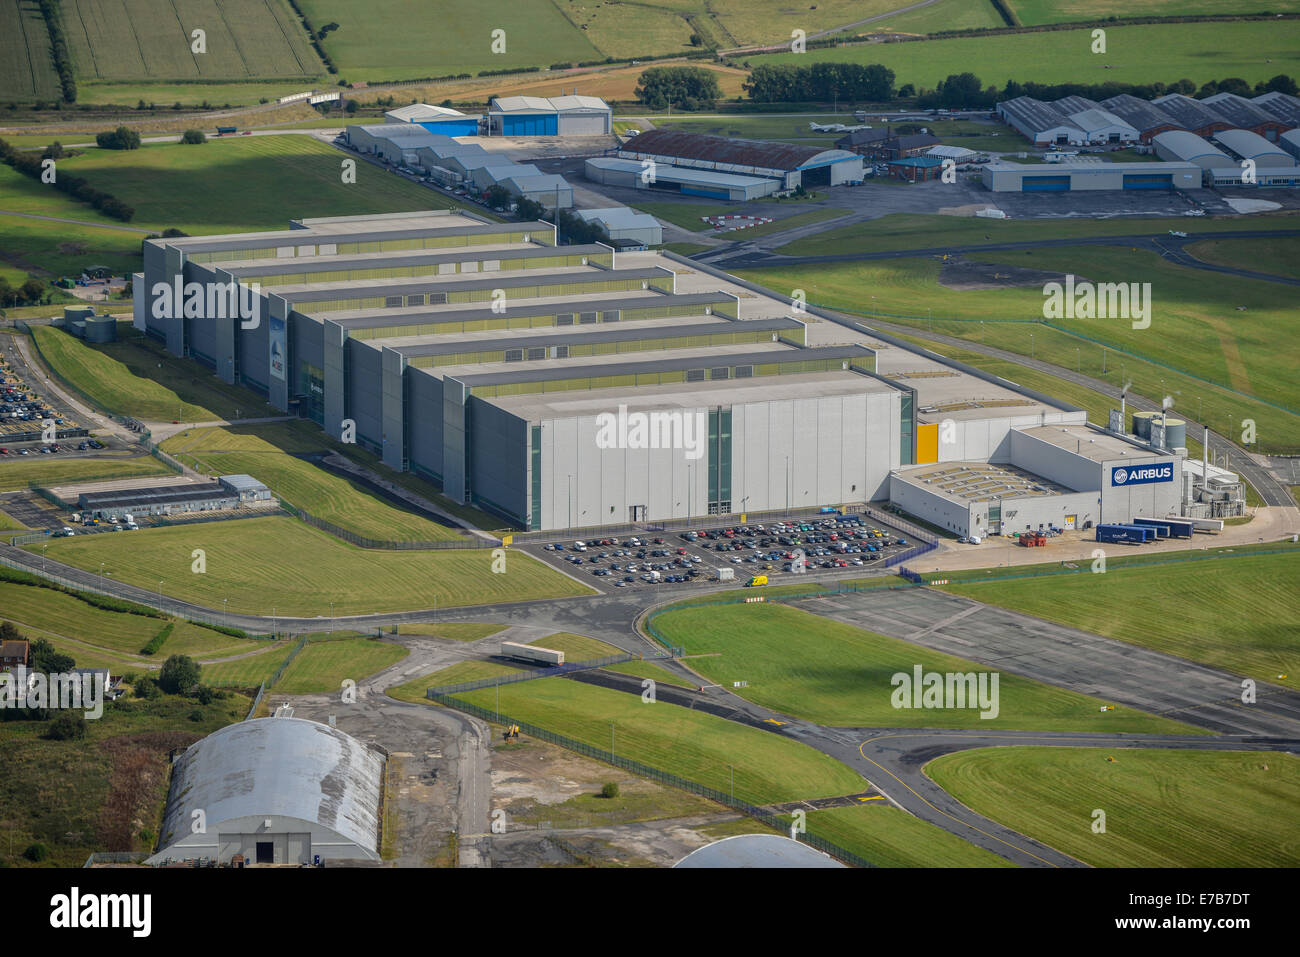 An aerial view showing the Airbus factory at Hawarden Airport, Cheshire UK Stock Photo